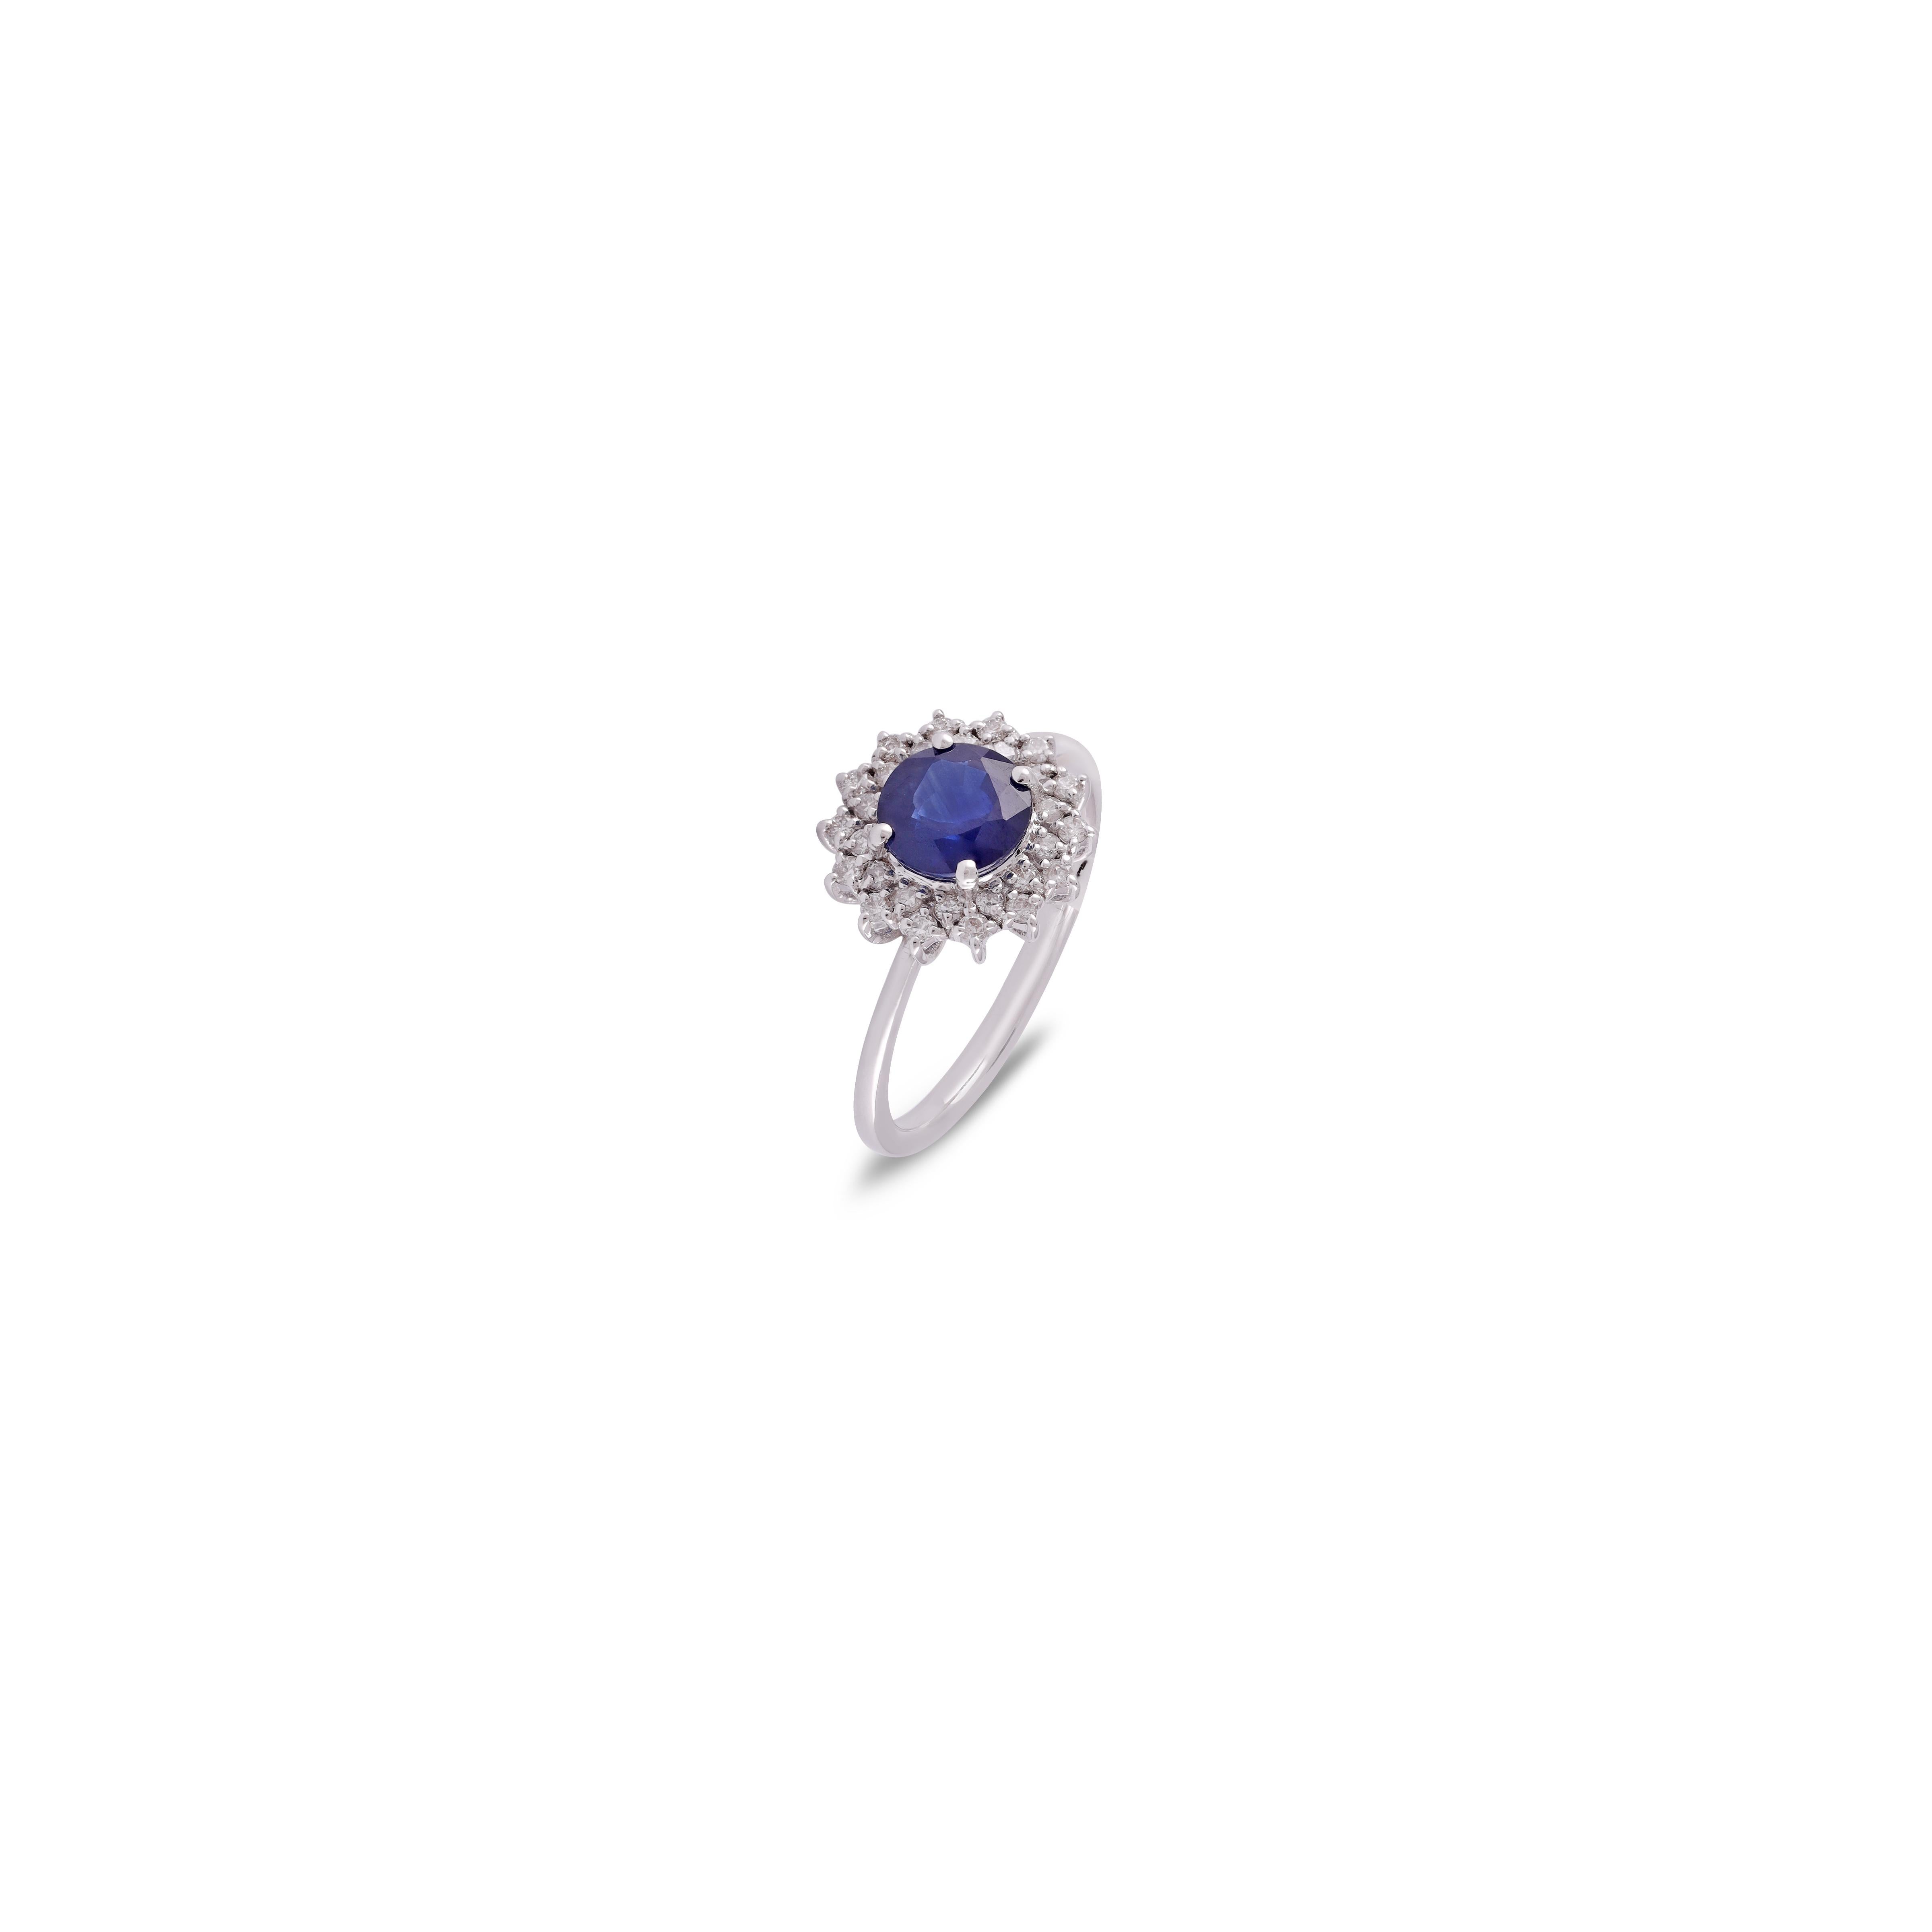 Mixed Cut 1.70 Carat Blue Sapphire and Diamond Ring in 18 Karat White Gold For Sale